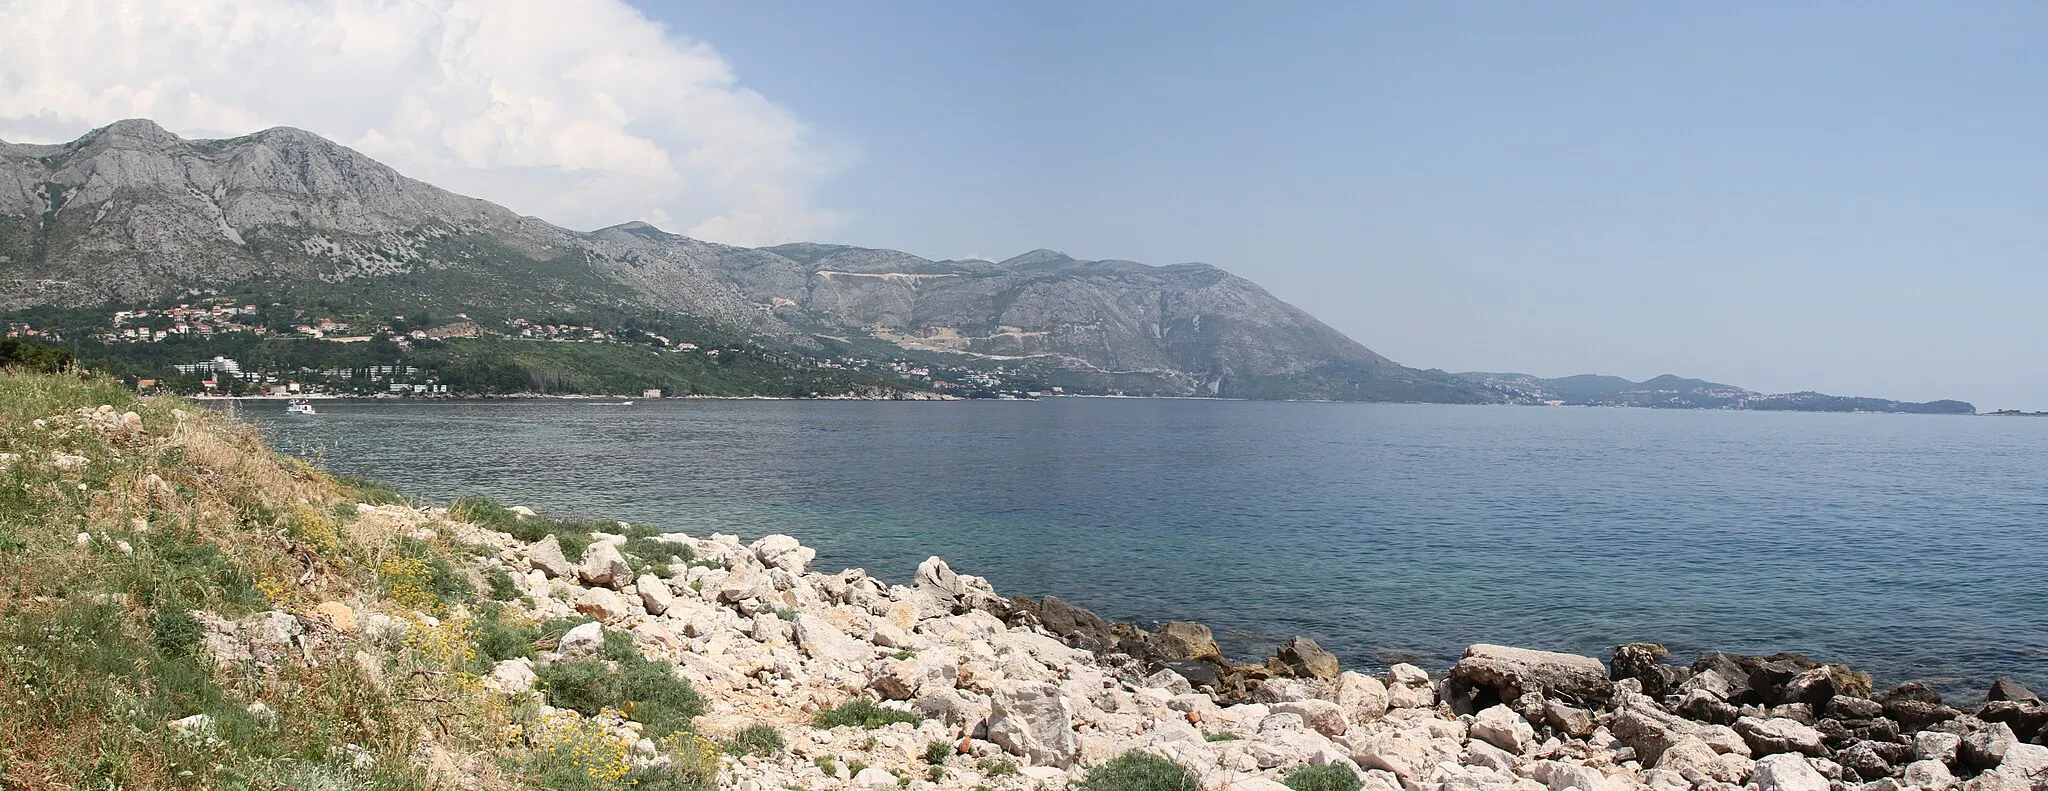 Photo showing: Konavle is a small settlement Close to Kupari, the southernmost settlement of Croatia.